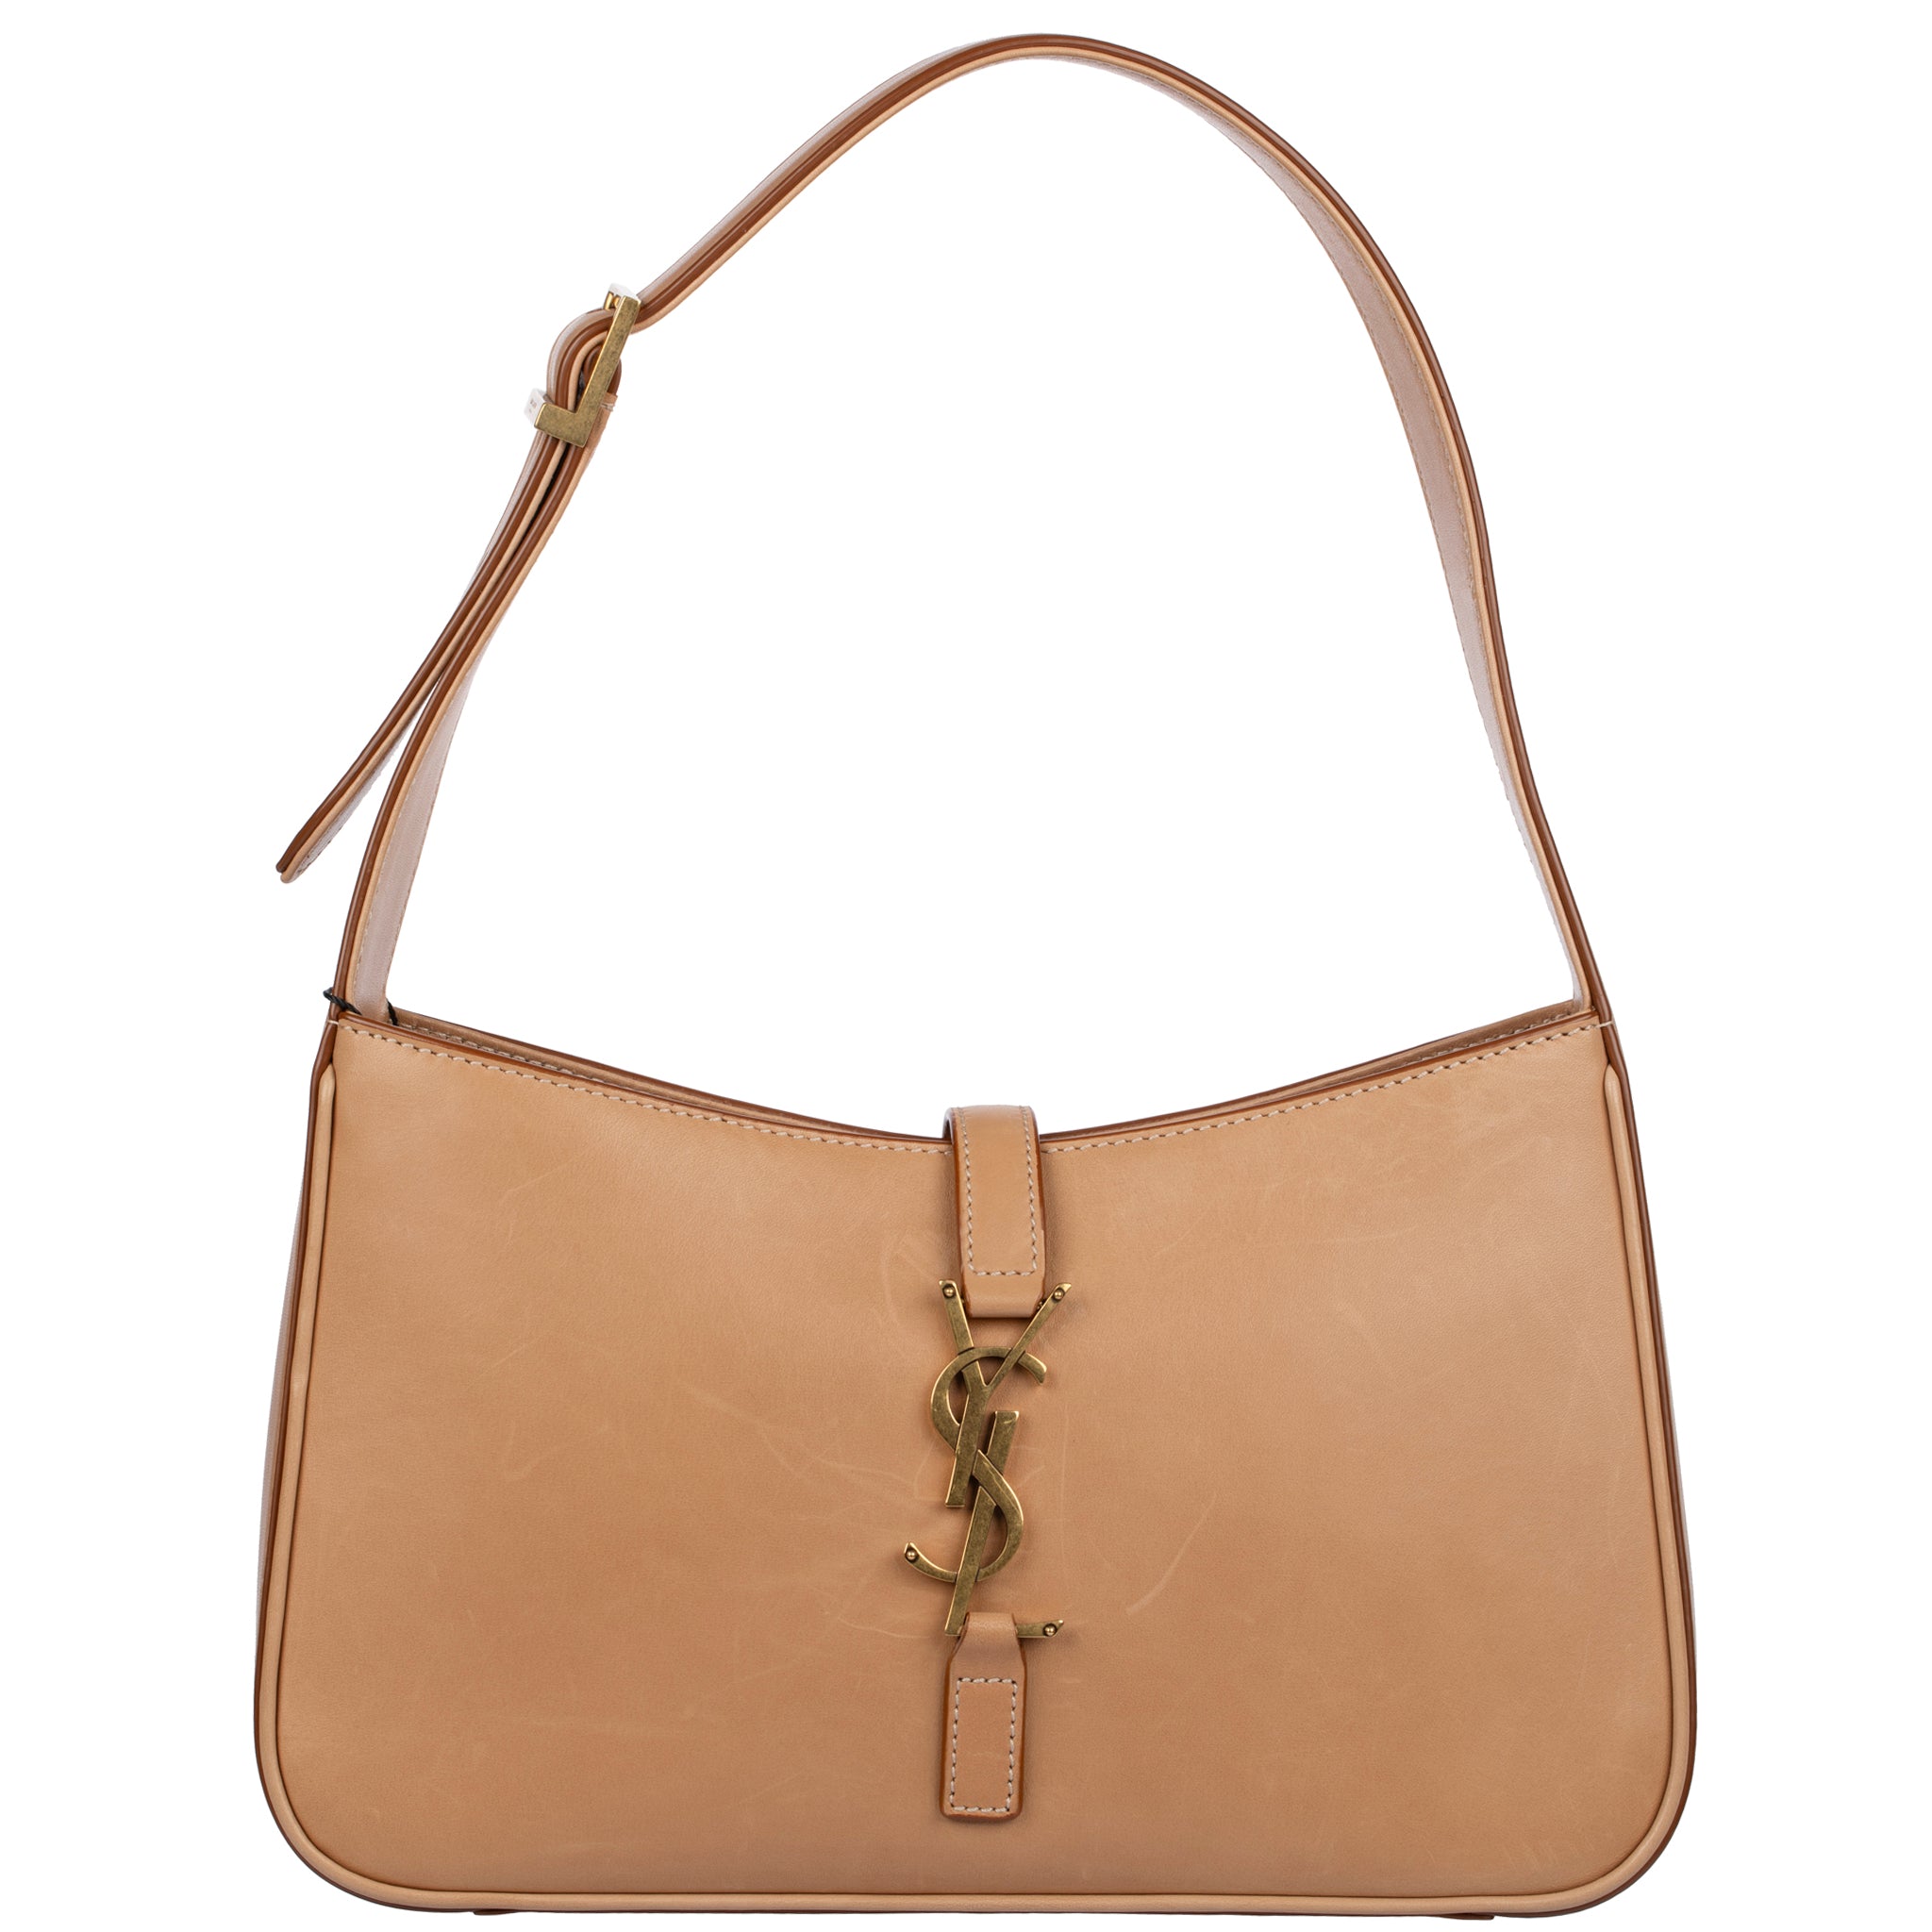 Yves Saint Laurent Le 5 à 7 Hobo Bag Smooth Tan Leather Gold Tone Hardware